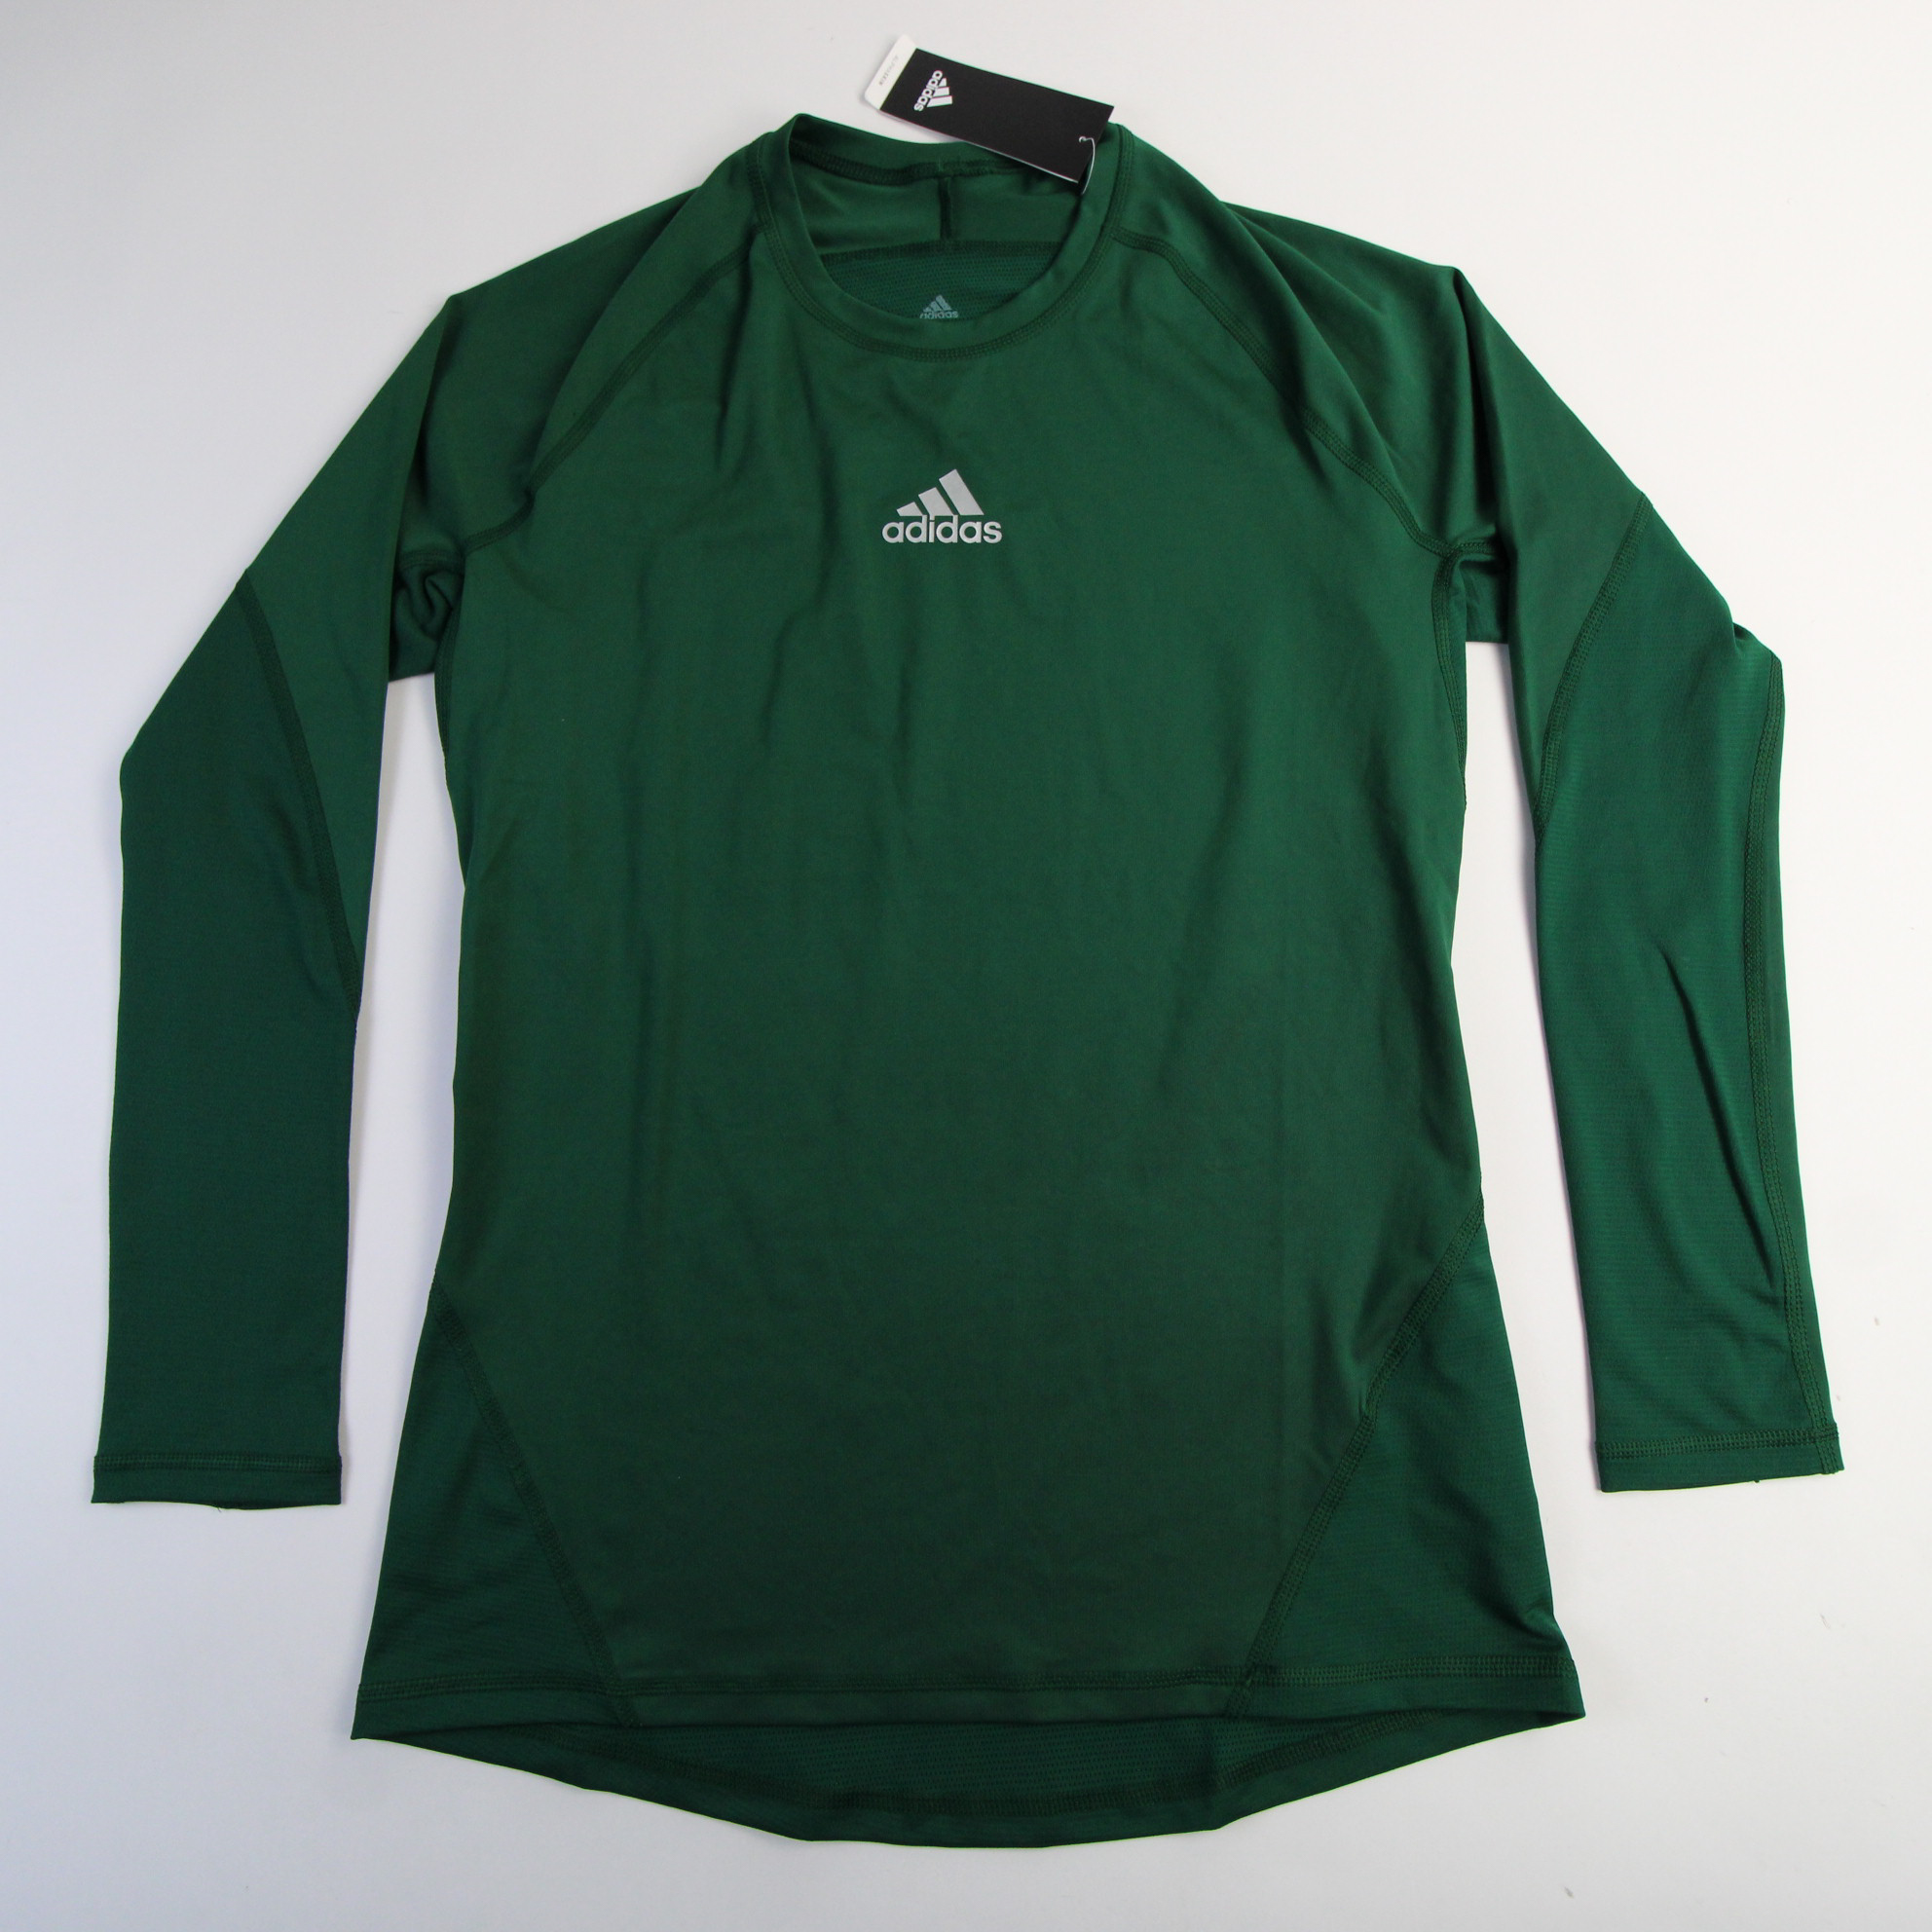 adidas Techfit Compression Top Men's Green New with Tags